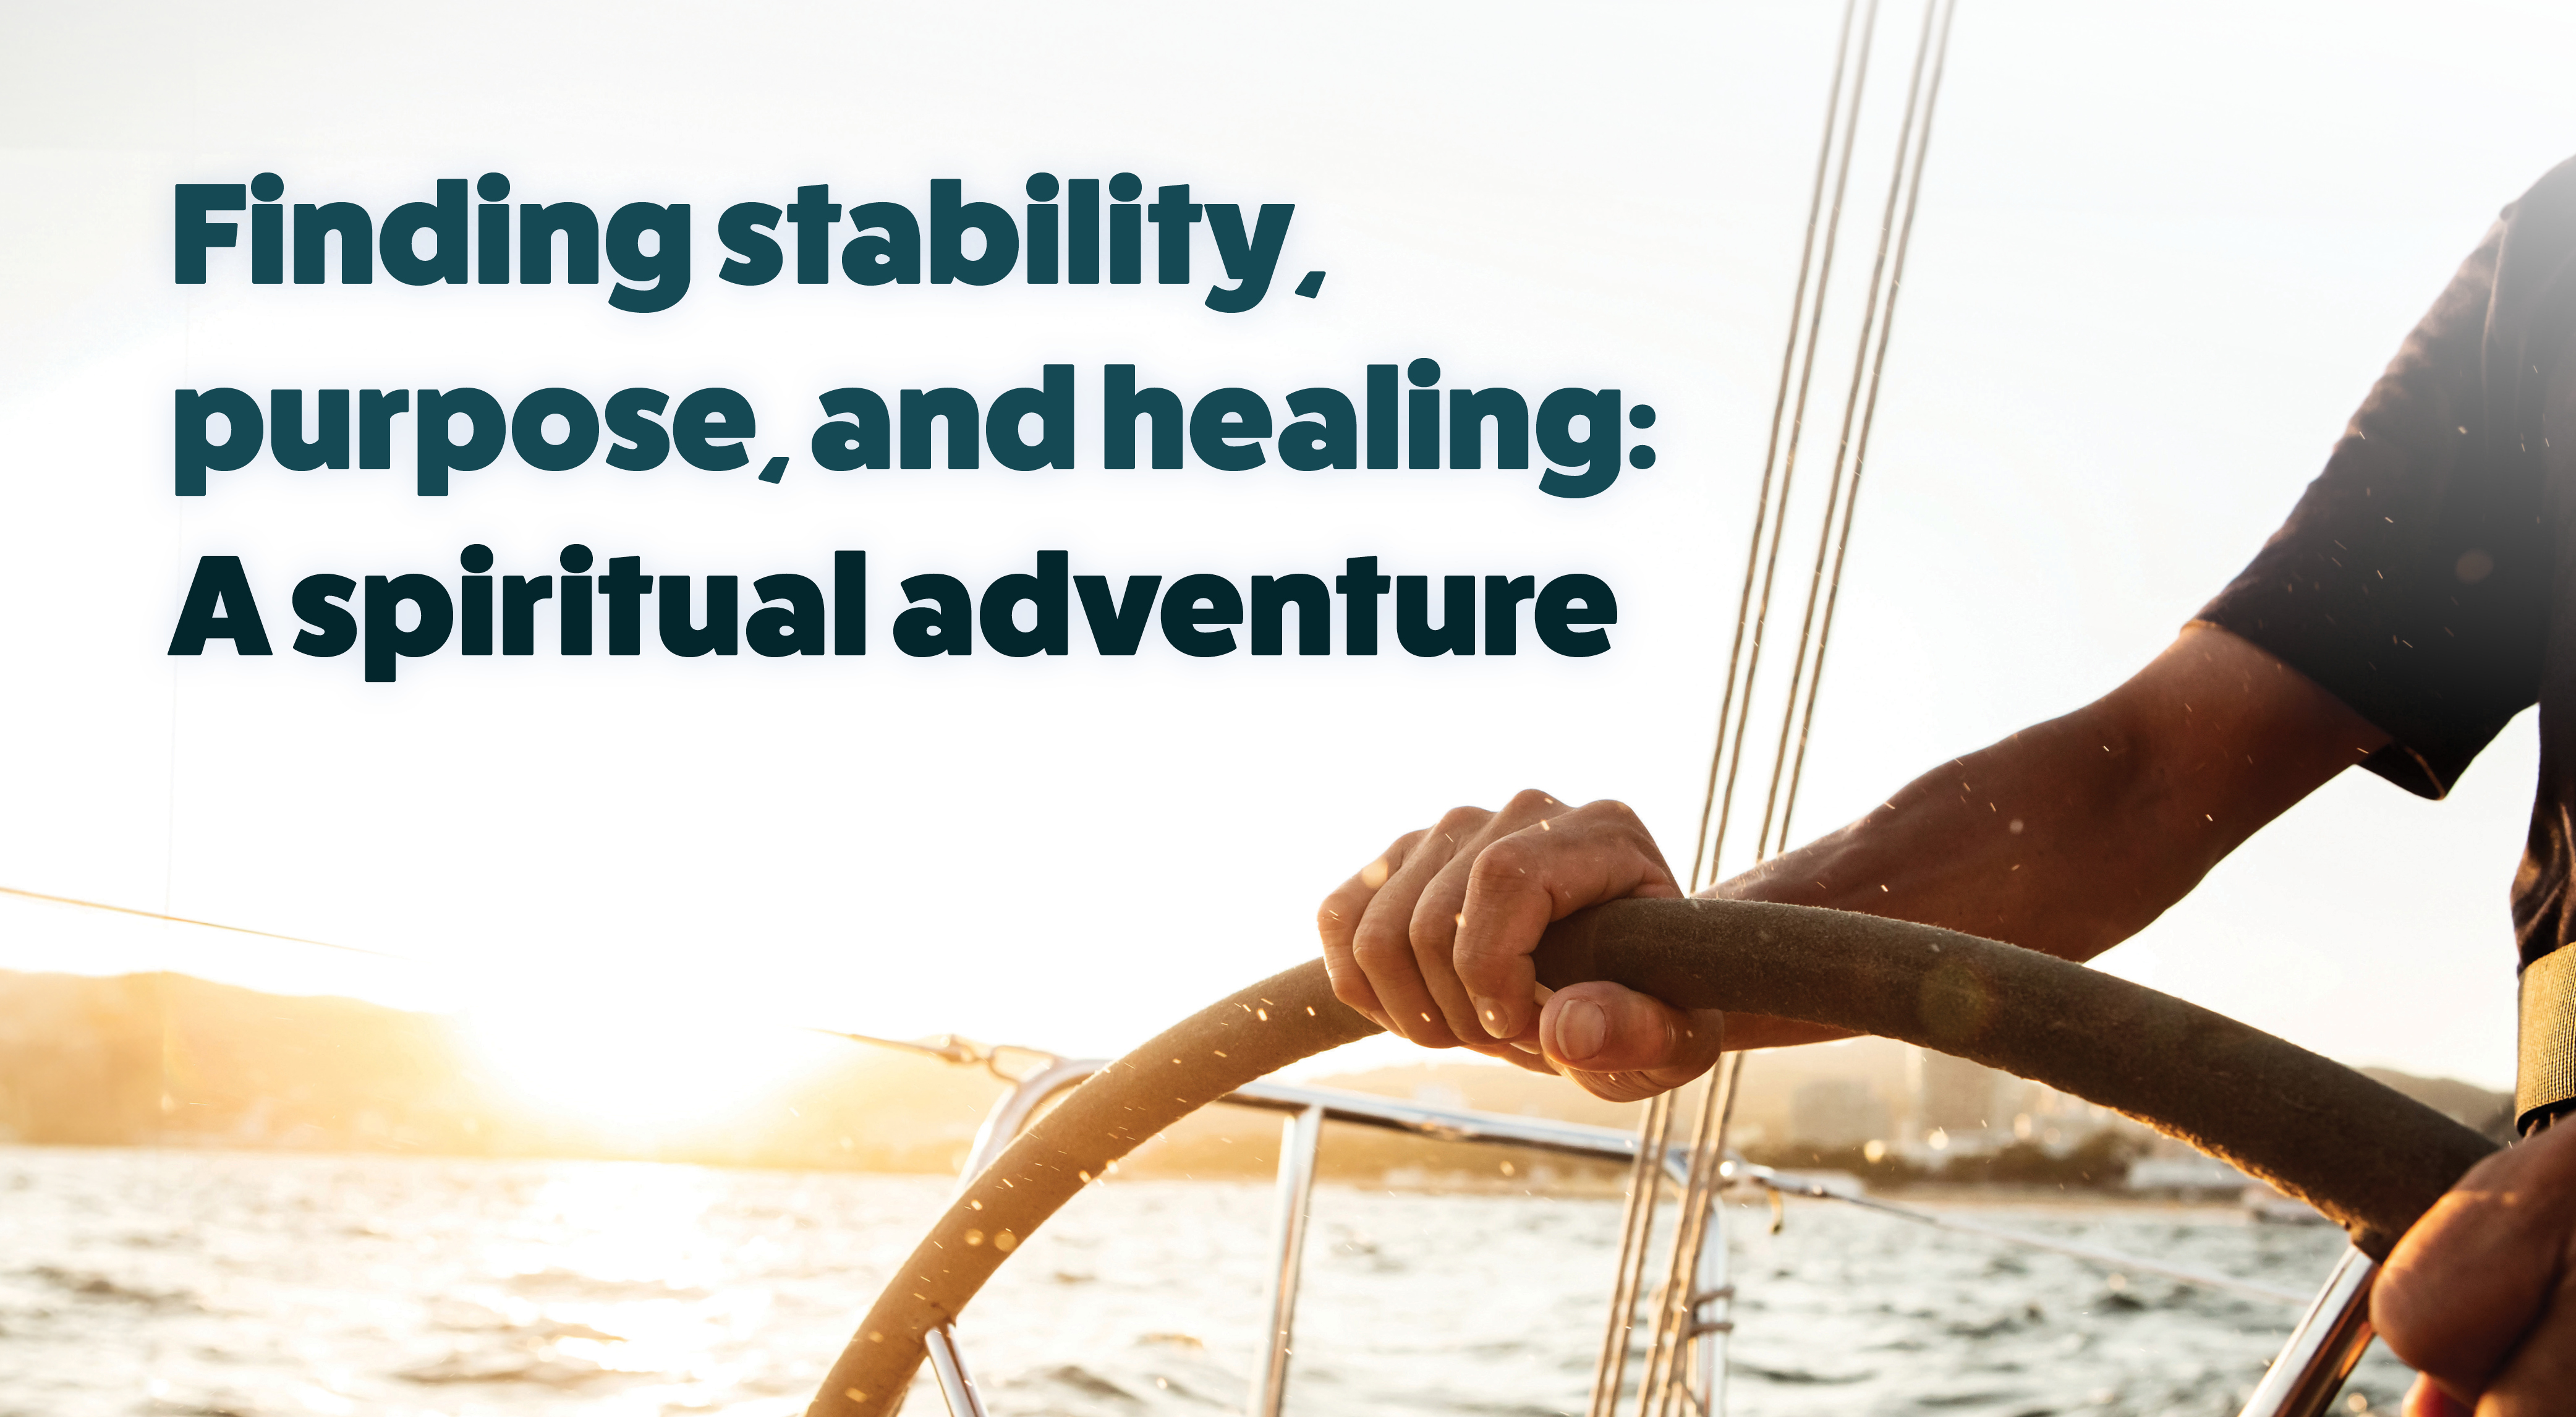 A talk on Christian Science: Finding stability, purpose and healing: A spiritual adventure on Monday, May 6 at 7:30 p.m.